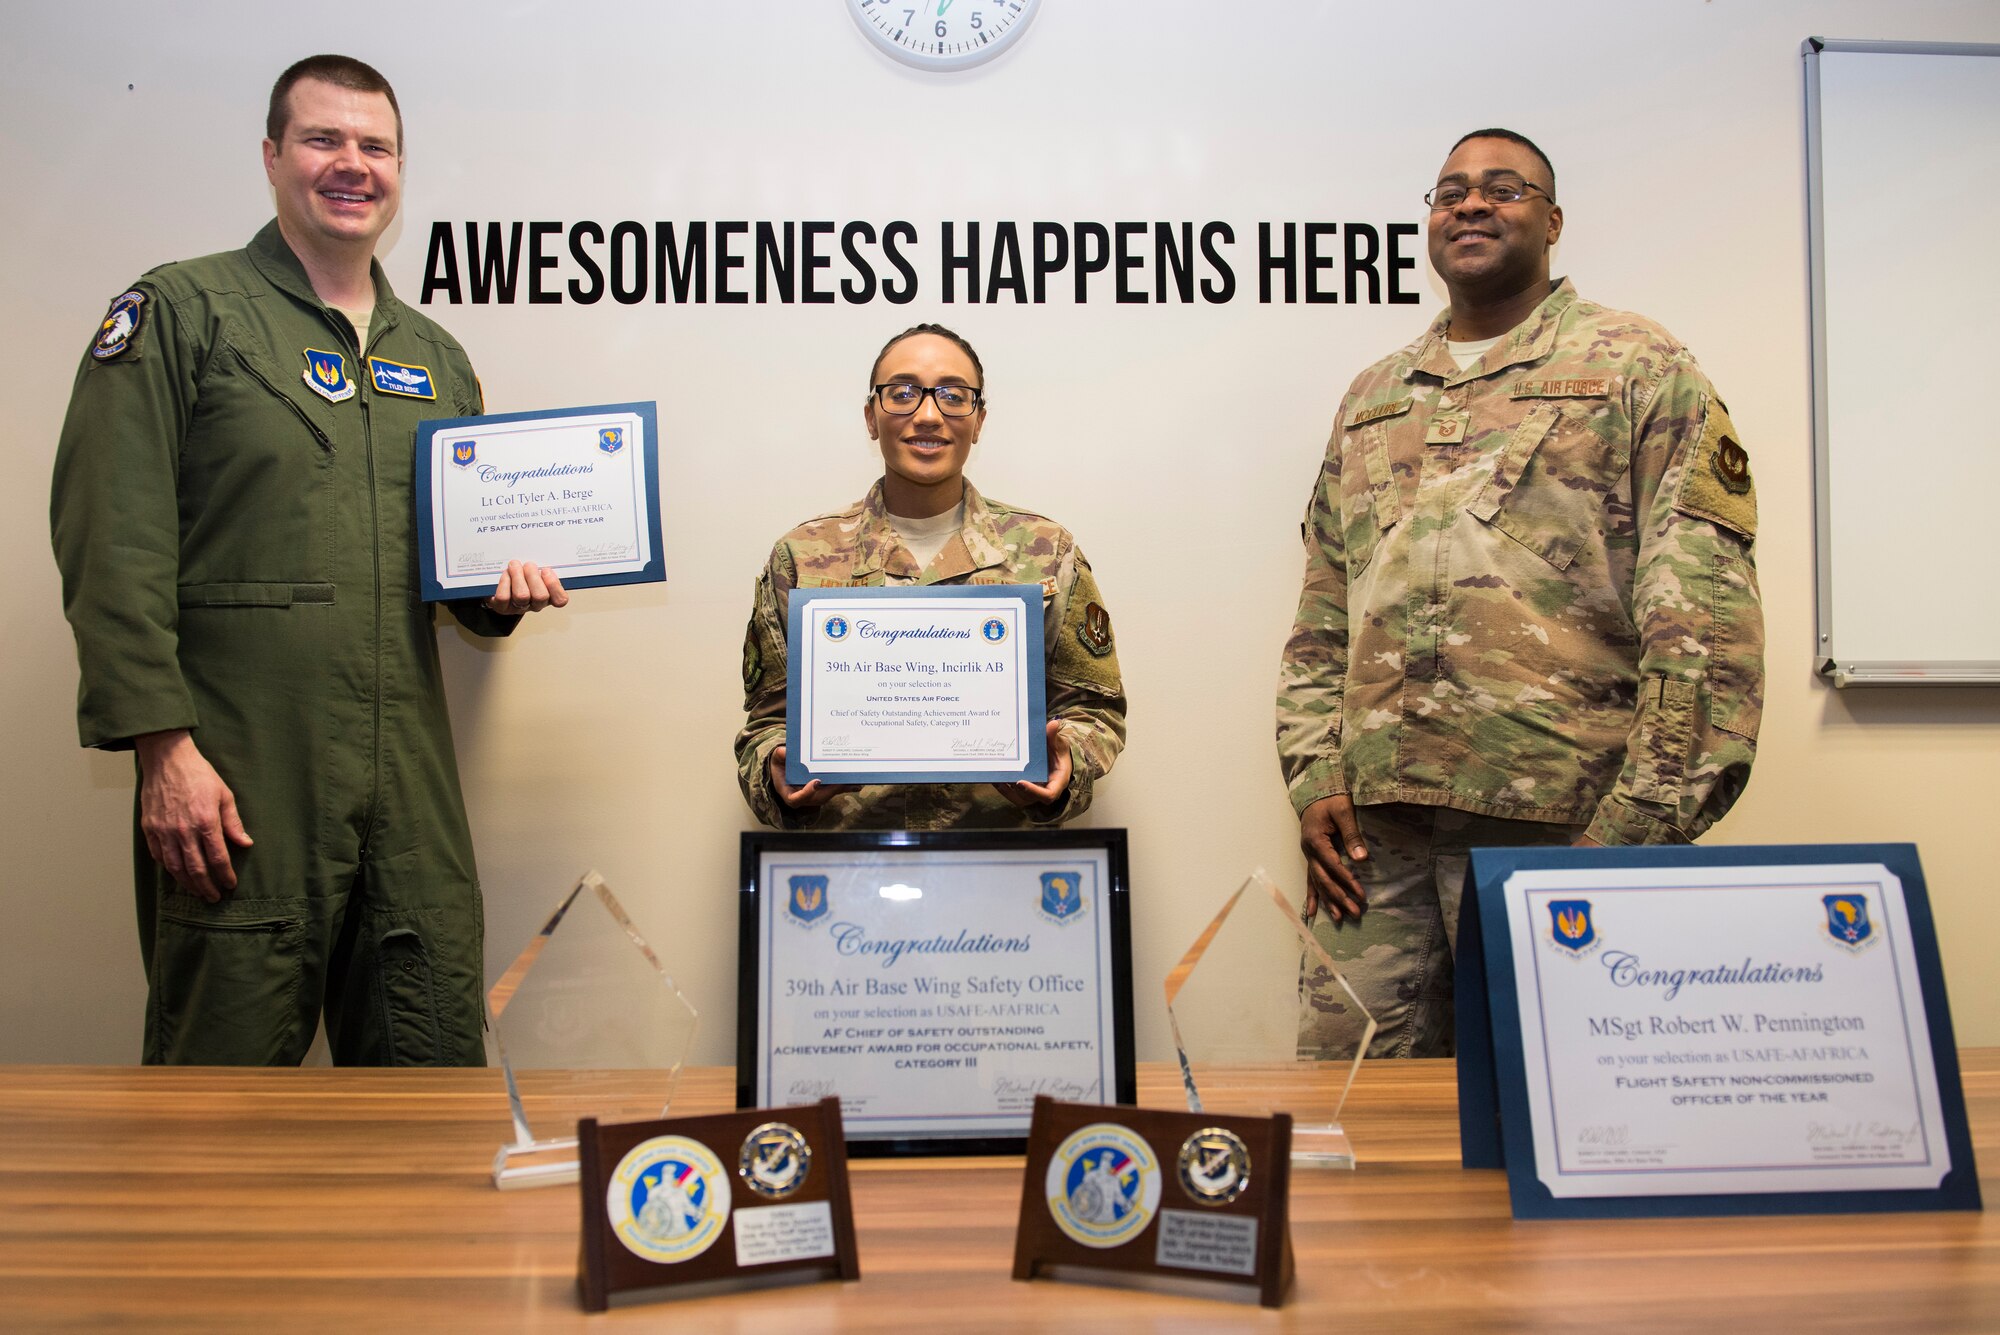 39th Air Base Wing Safety office staff presents their many Air Force level awards, March 4, 2020, at Incirlik Air Base, Turkey. These awards recognize their achievements in occupational safety. (U.S. Air Force photo by Senior Airman Matthew Angulo)